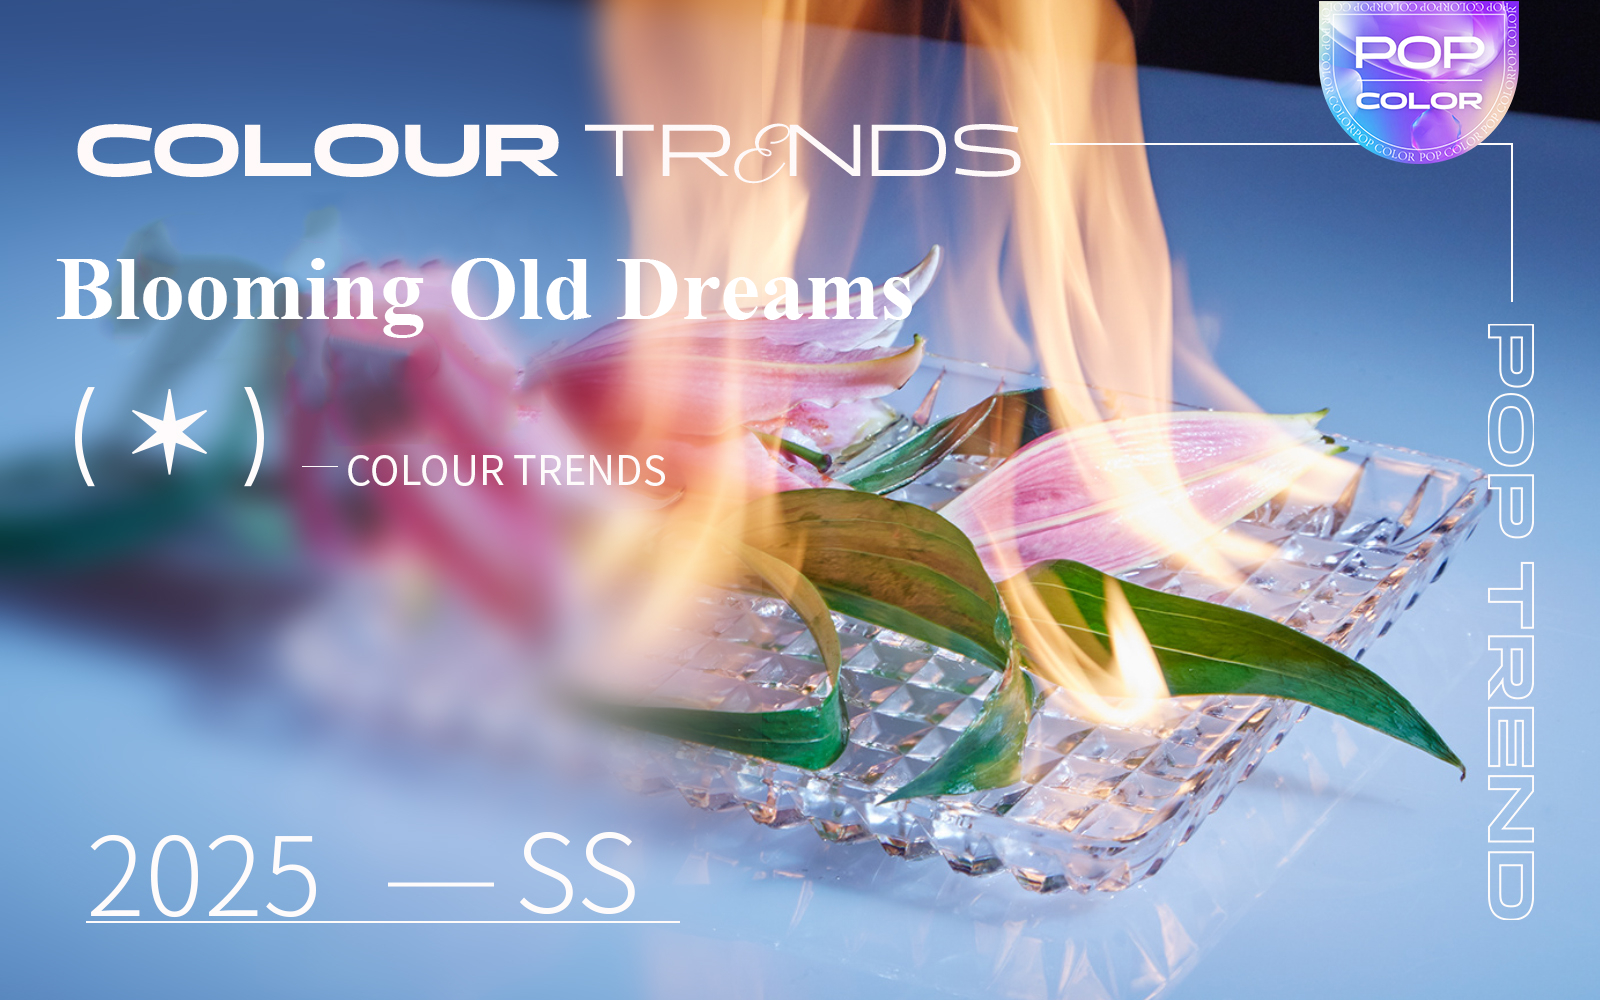 Blooming Old Dreams -- The Color Trend for Women's Gown Dress